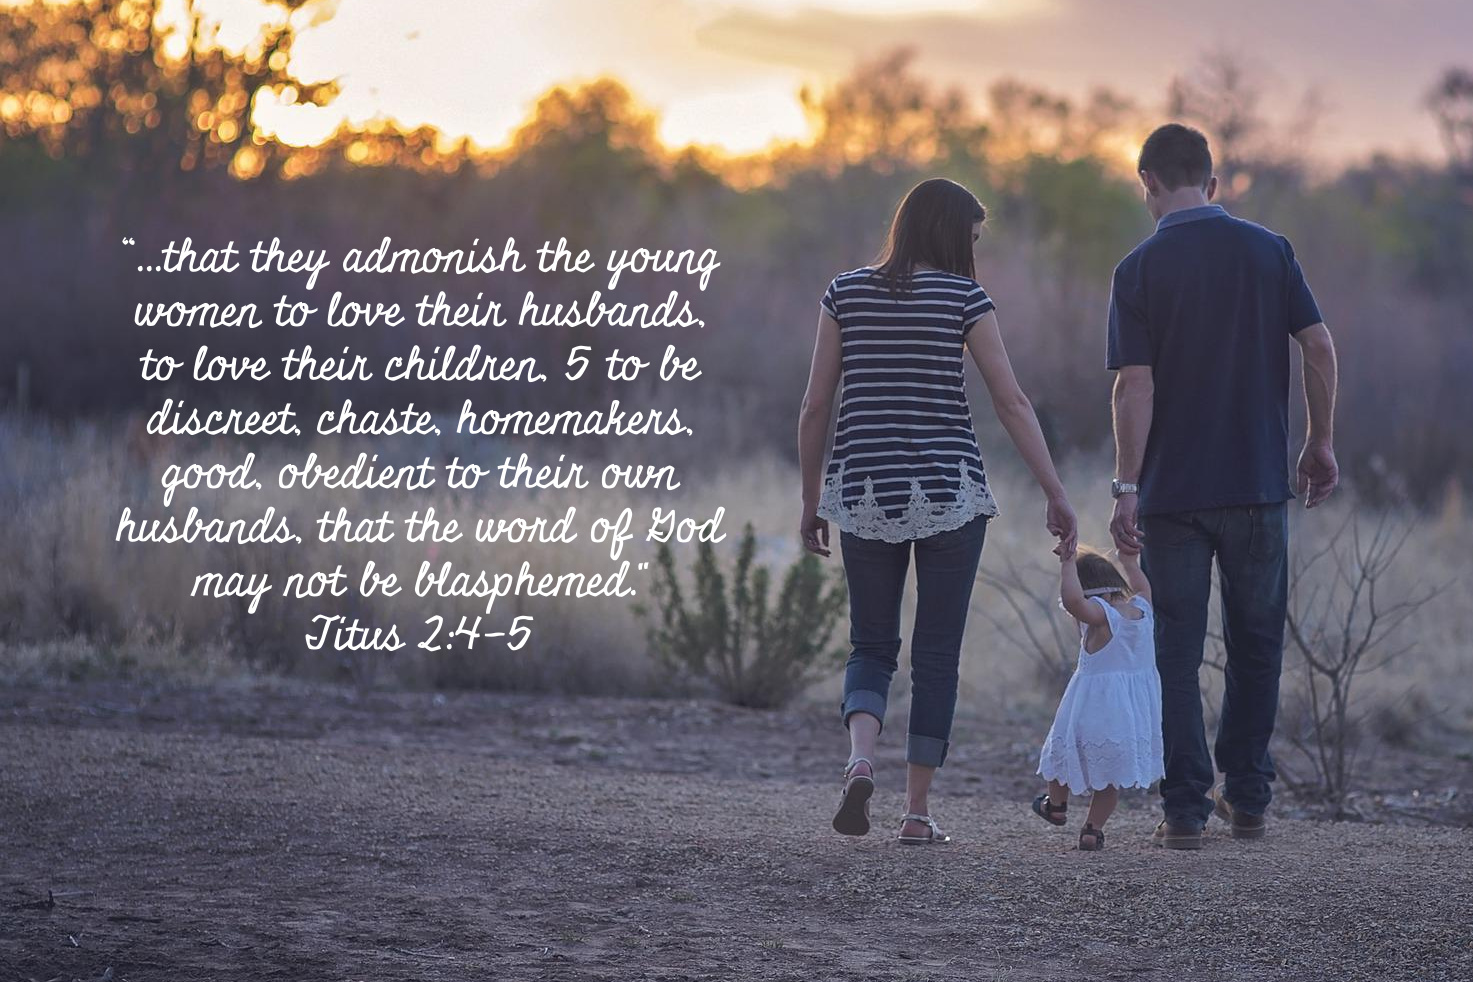 Godly wisdom for parents, husbands and wives who love thier child